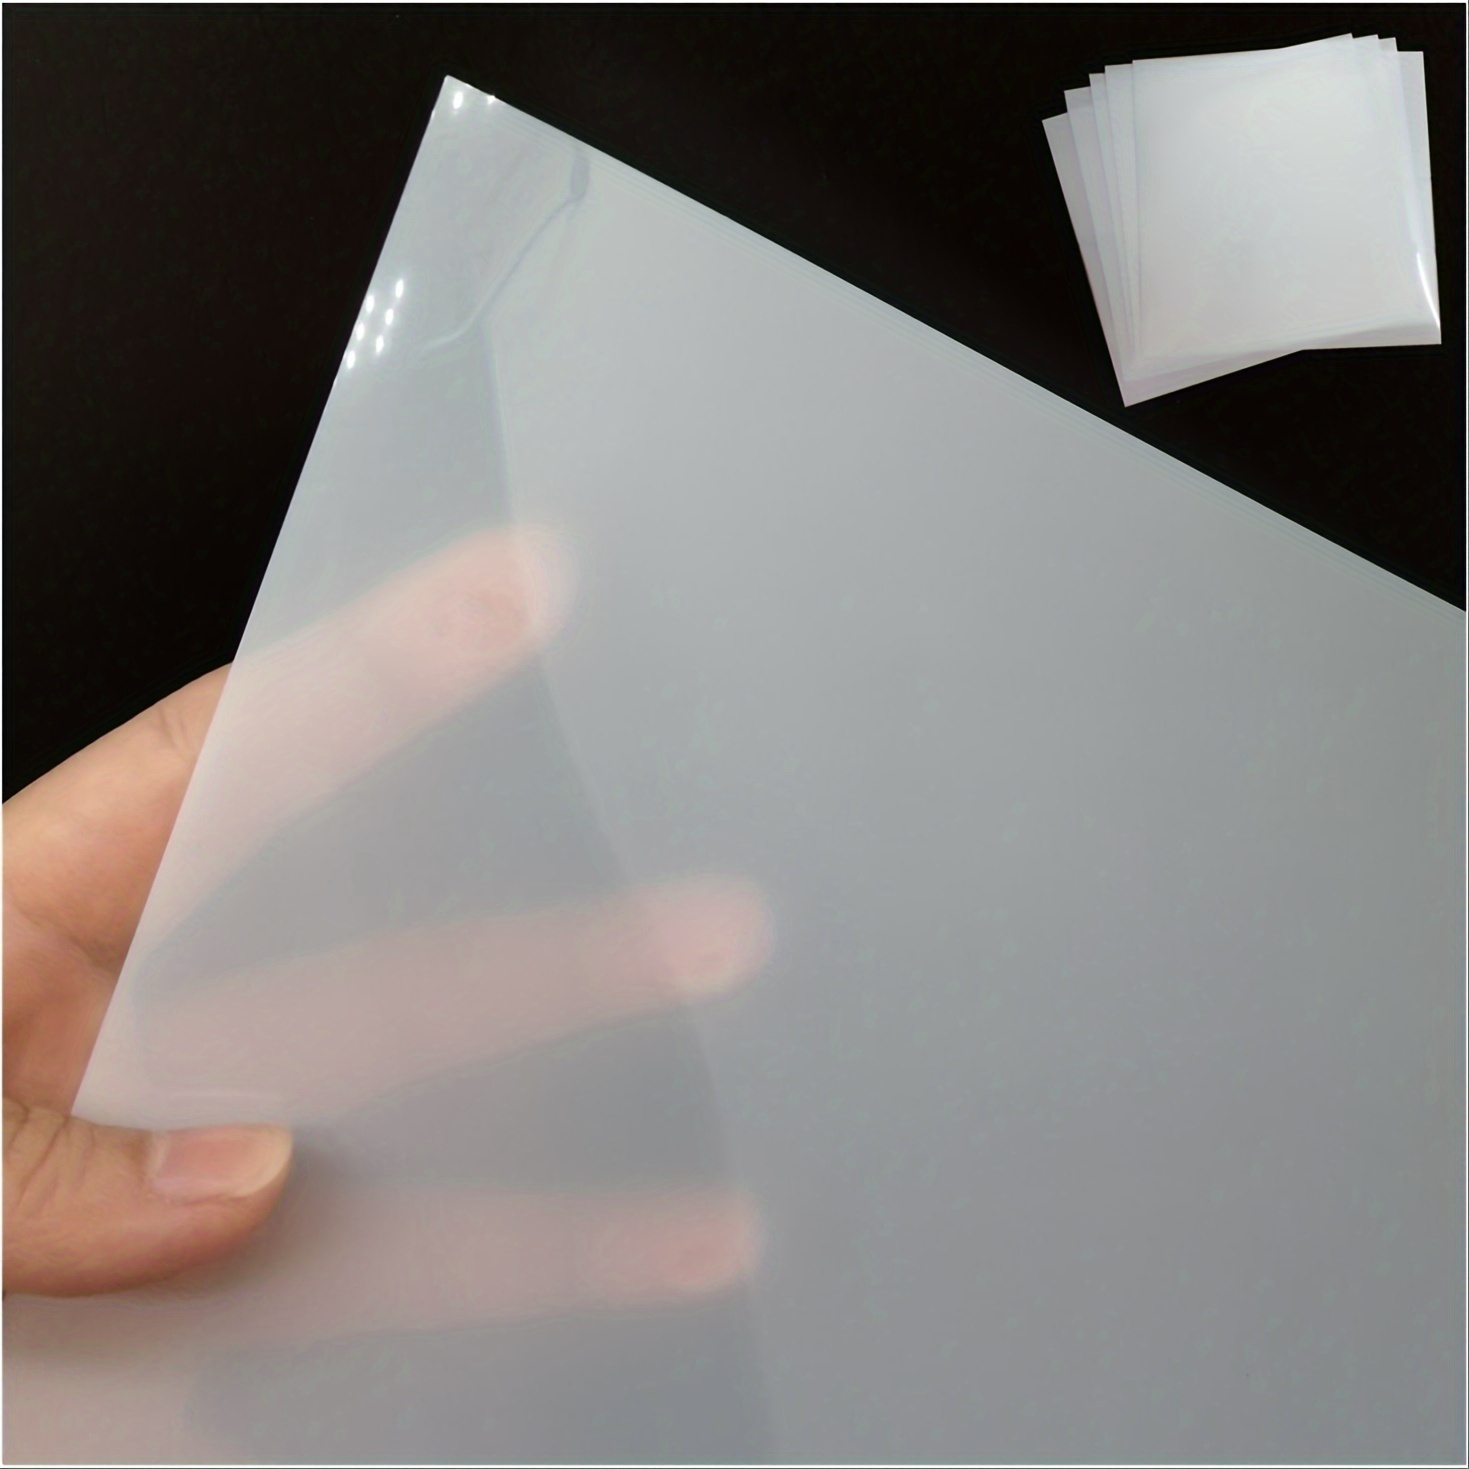 

10pcs 10 Mil Mylar Sheet 12 X 12 Inch Milky Translucent Pet Blank Stencil Making Sheet For Cricut, Laser Cutting, Cut Tool Template Material For Cutting Machines, Food-safe Craft Plastic